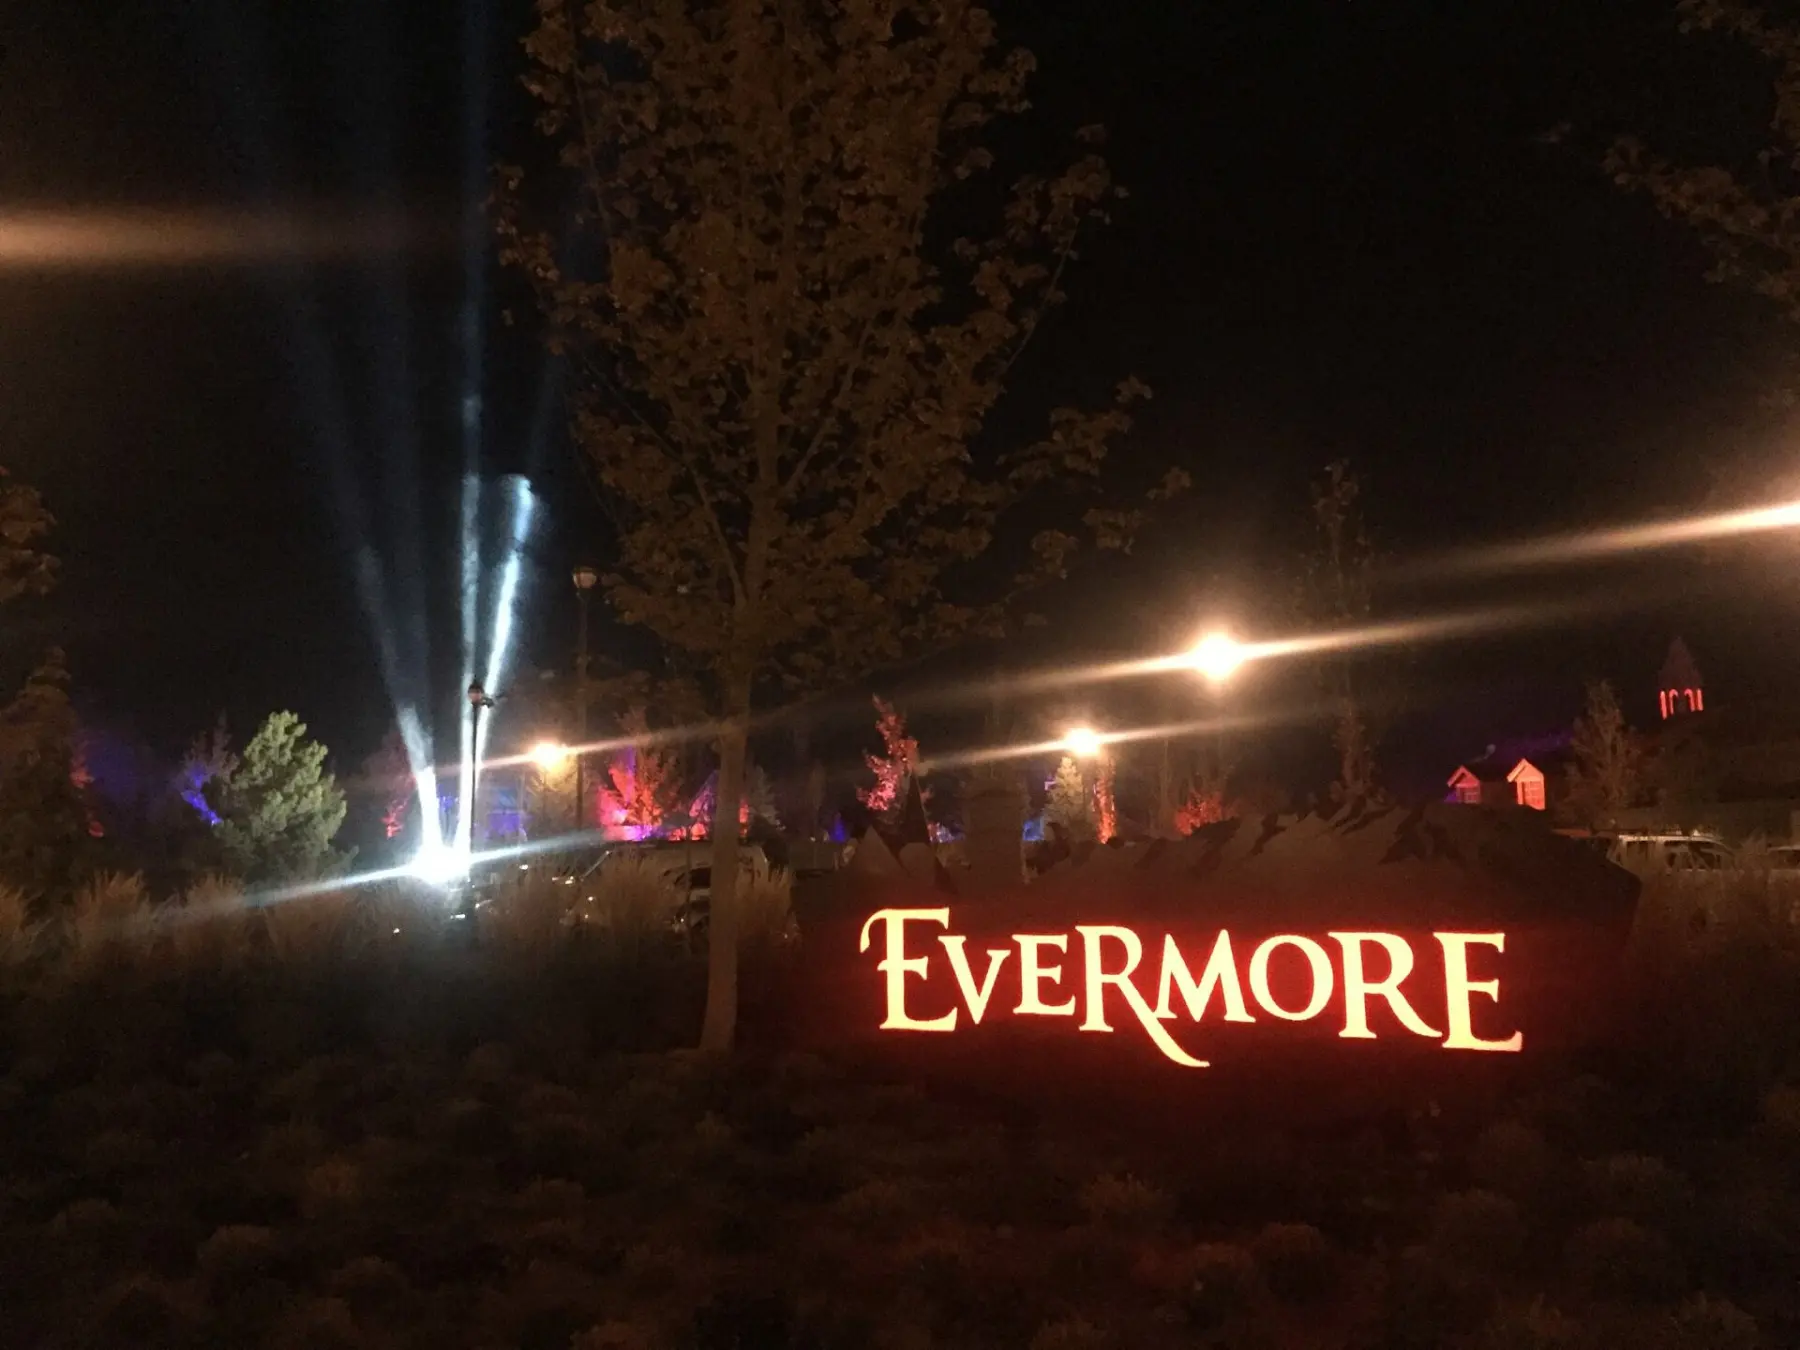 The "Evermore" sign lit up at night